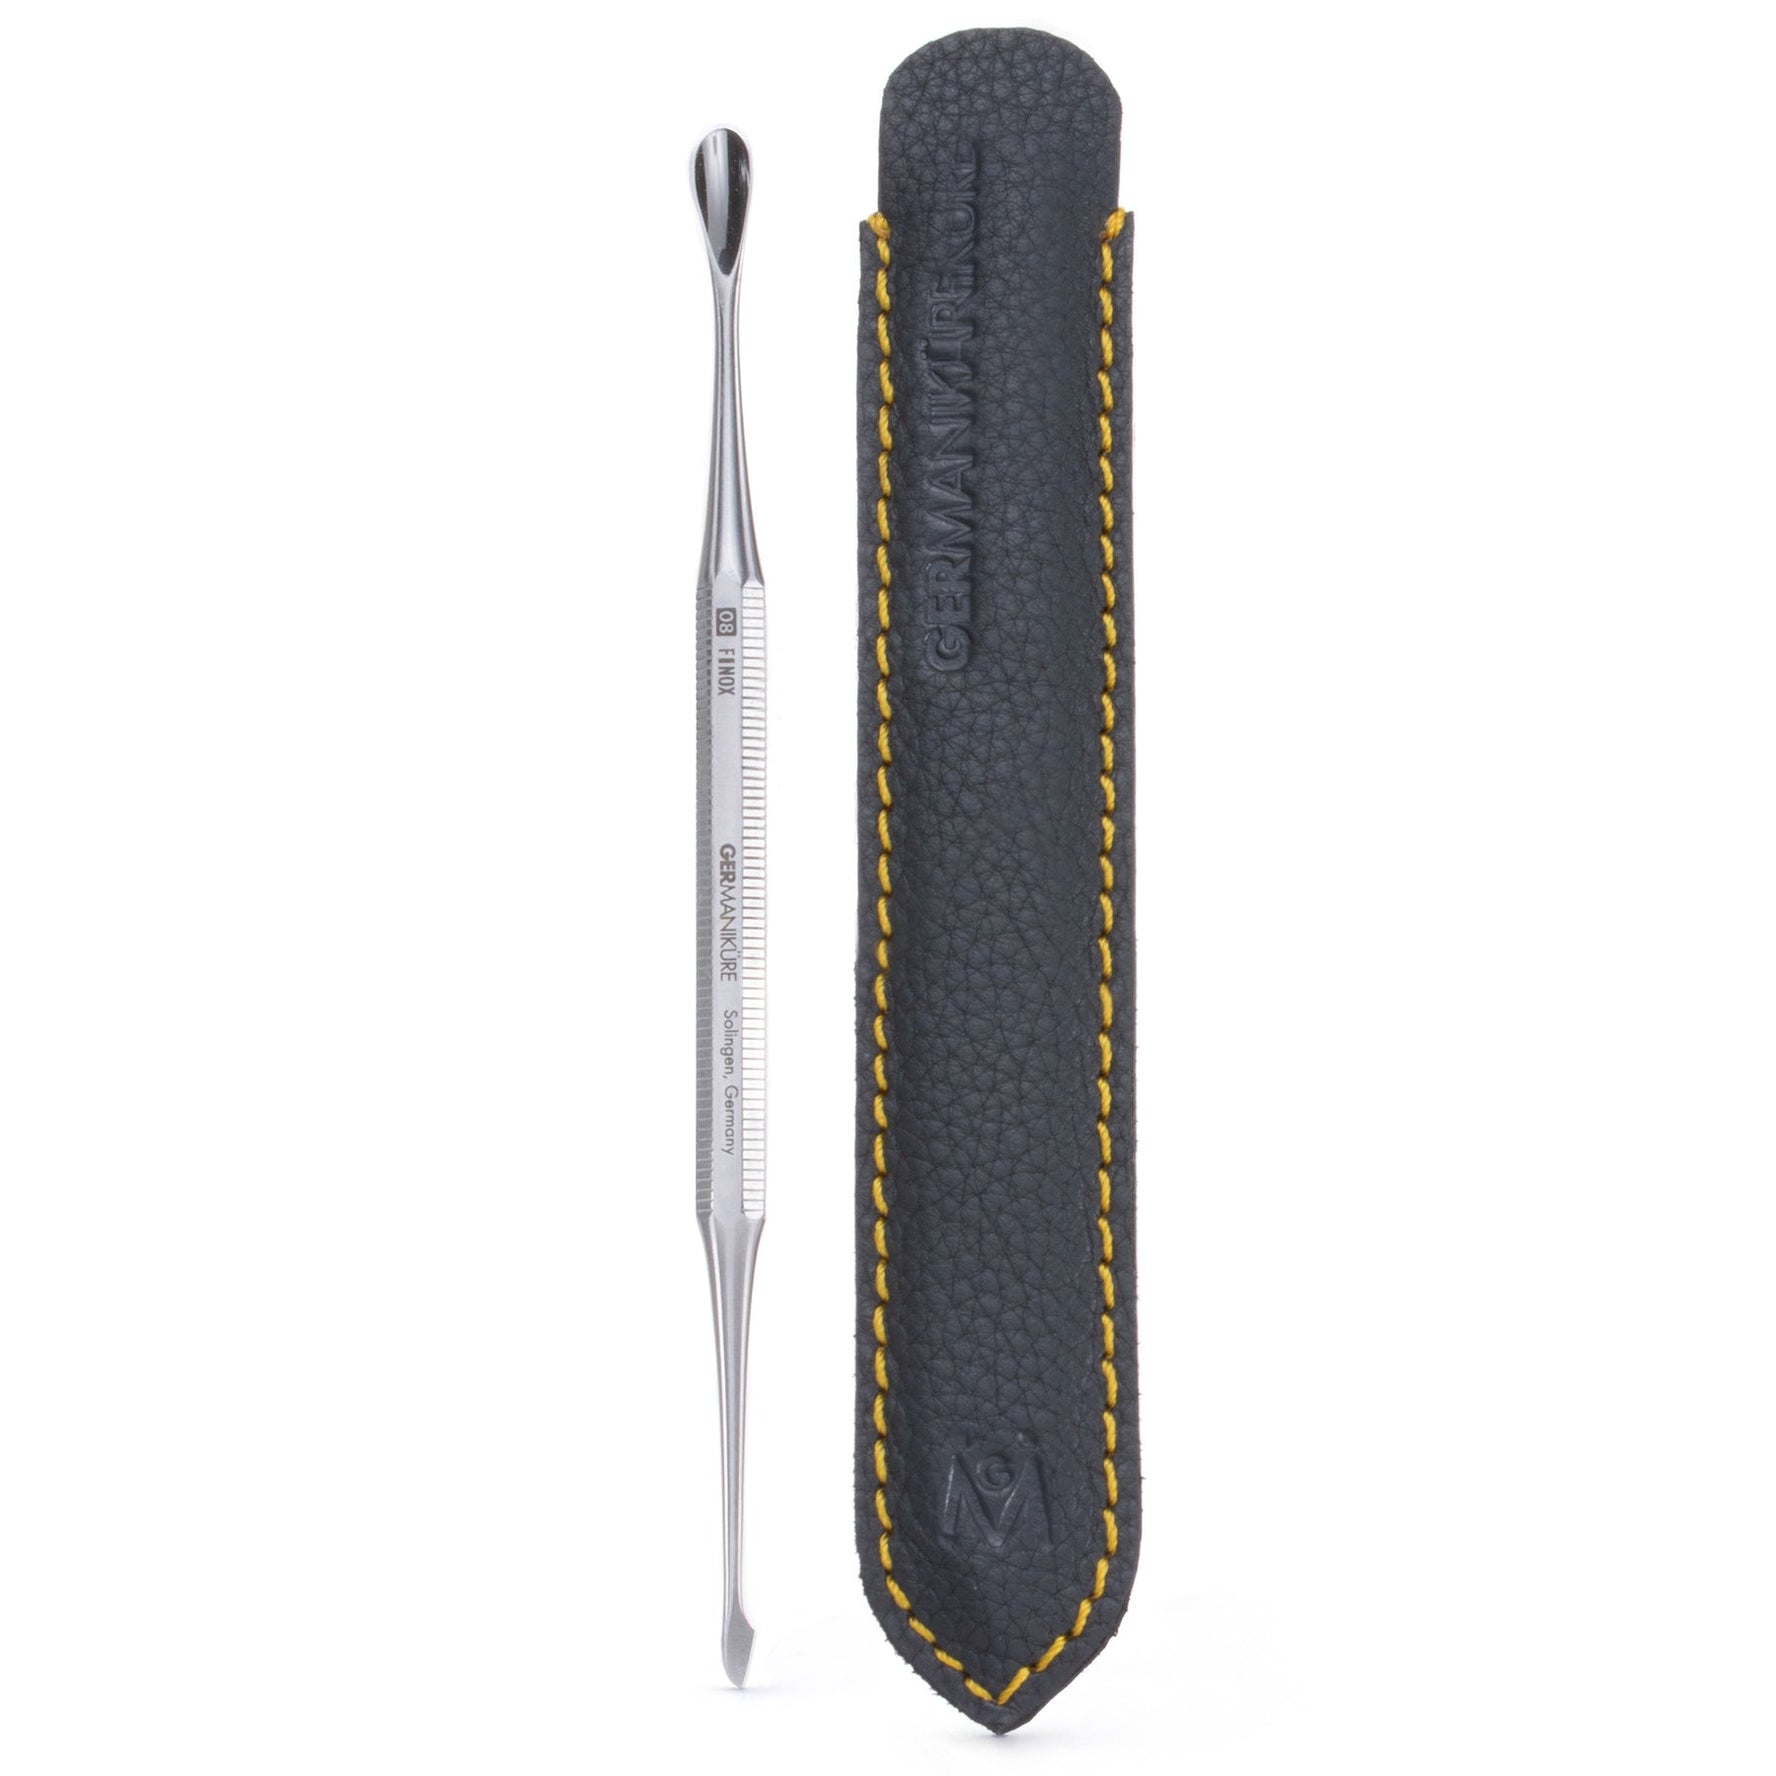 Dual Sided Nail Knife and Cuticle Pusher